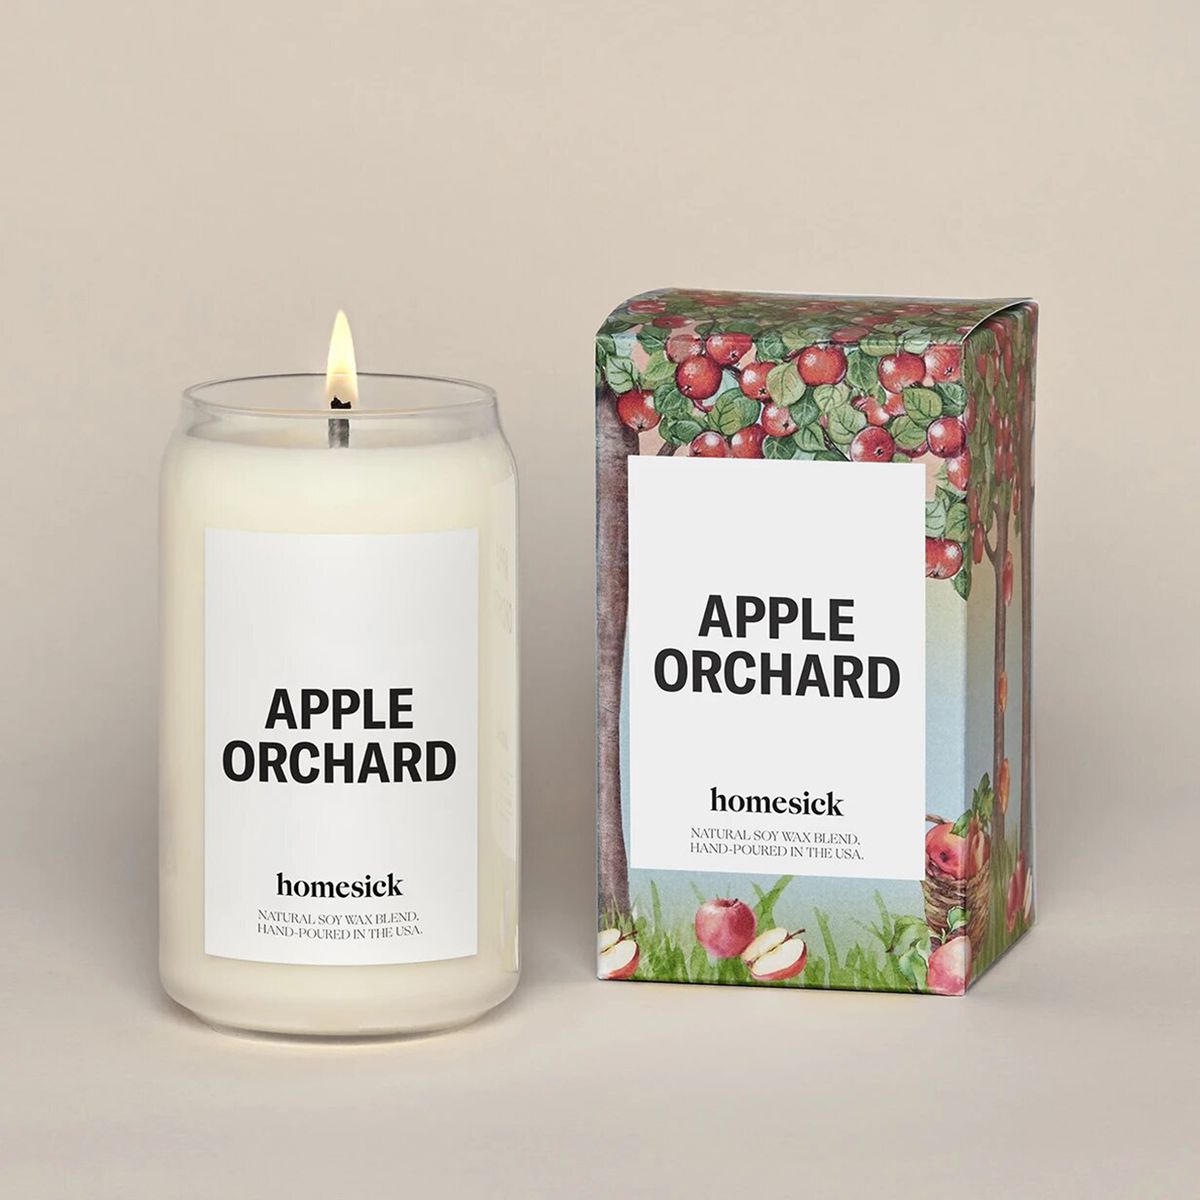 Homesick Apple Orchard Candle